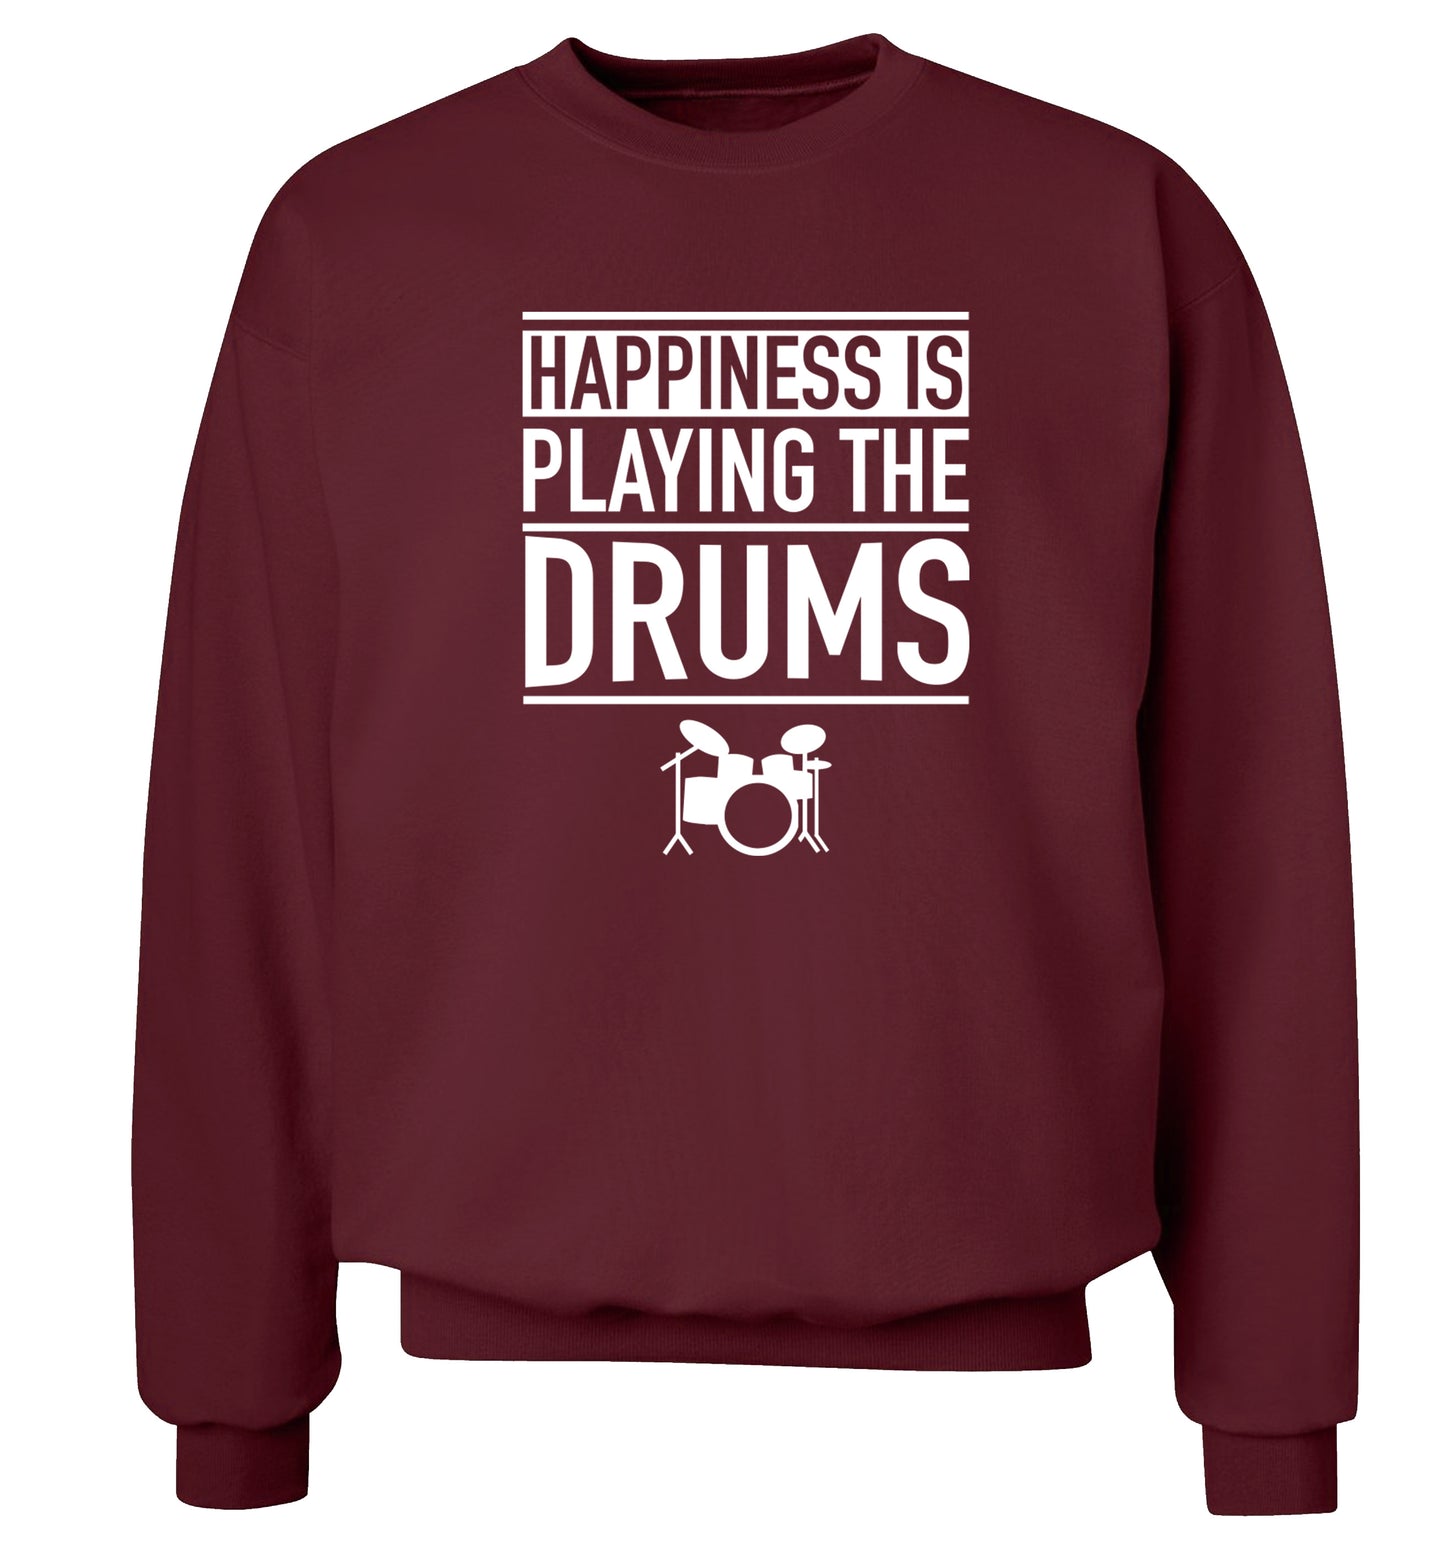 Happiness is playing the drums Adult's unisex maroon Sweater 2XL